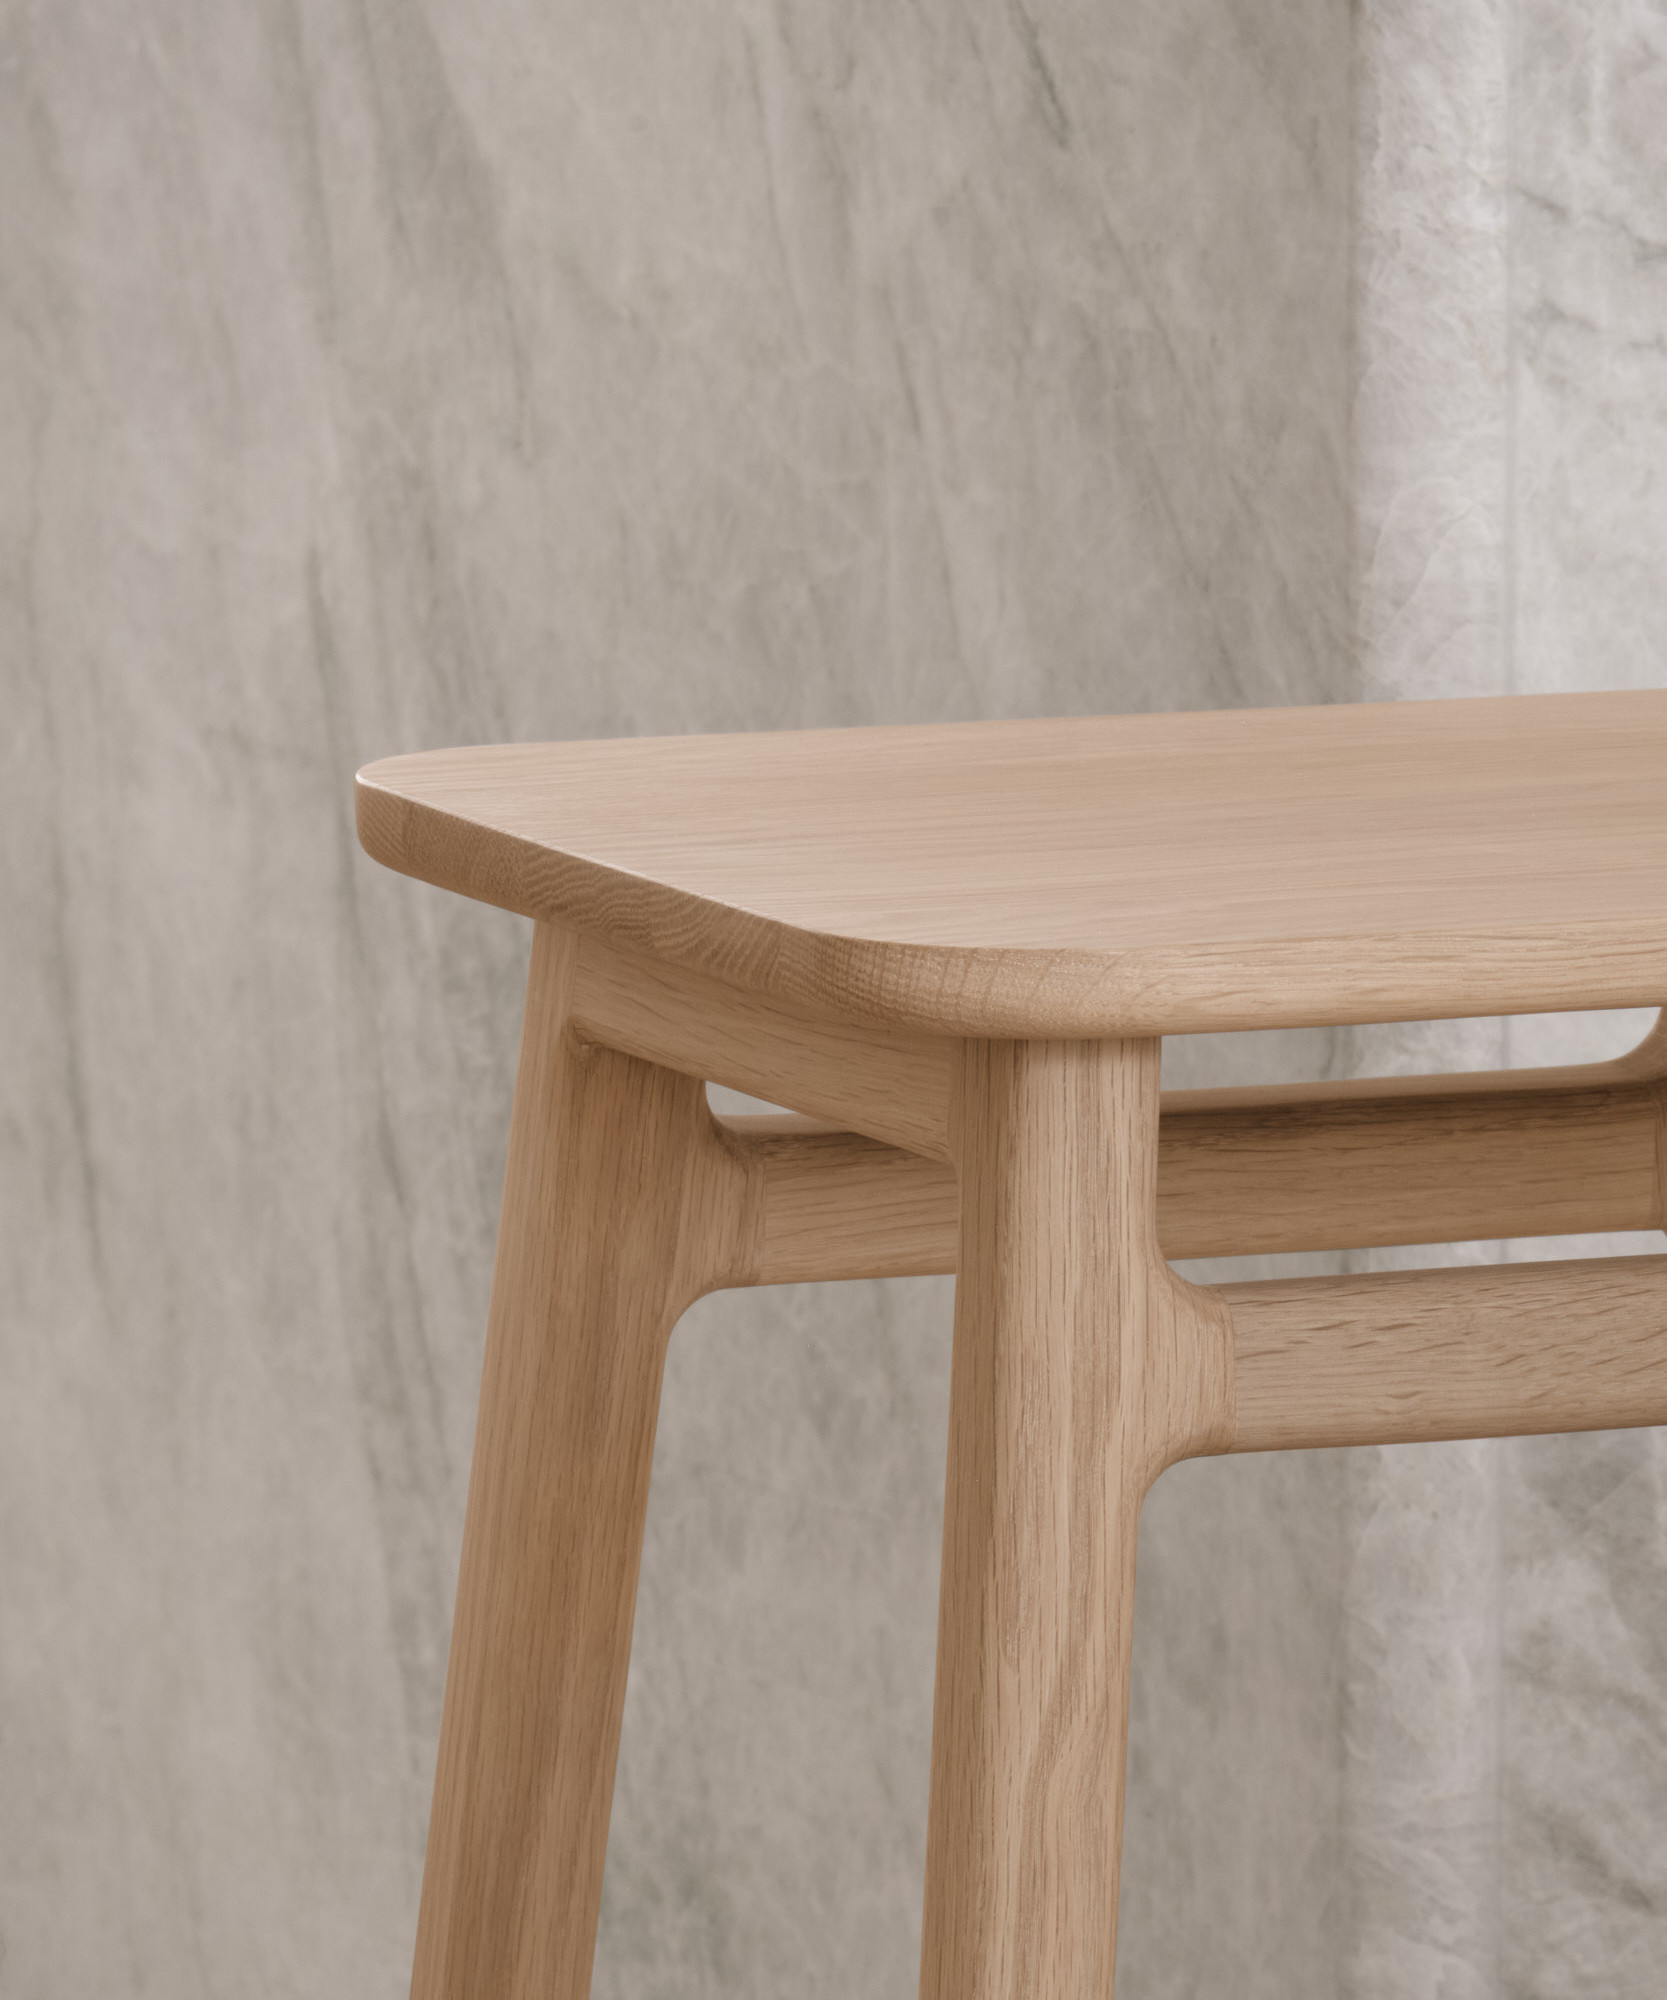 Olmsted stool seat detail